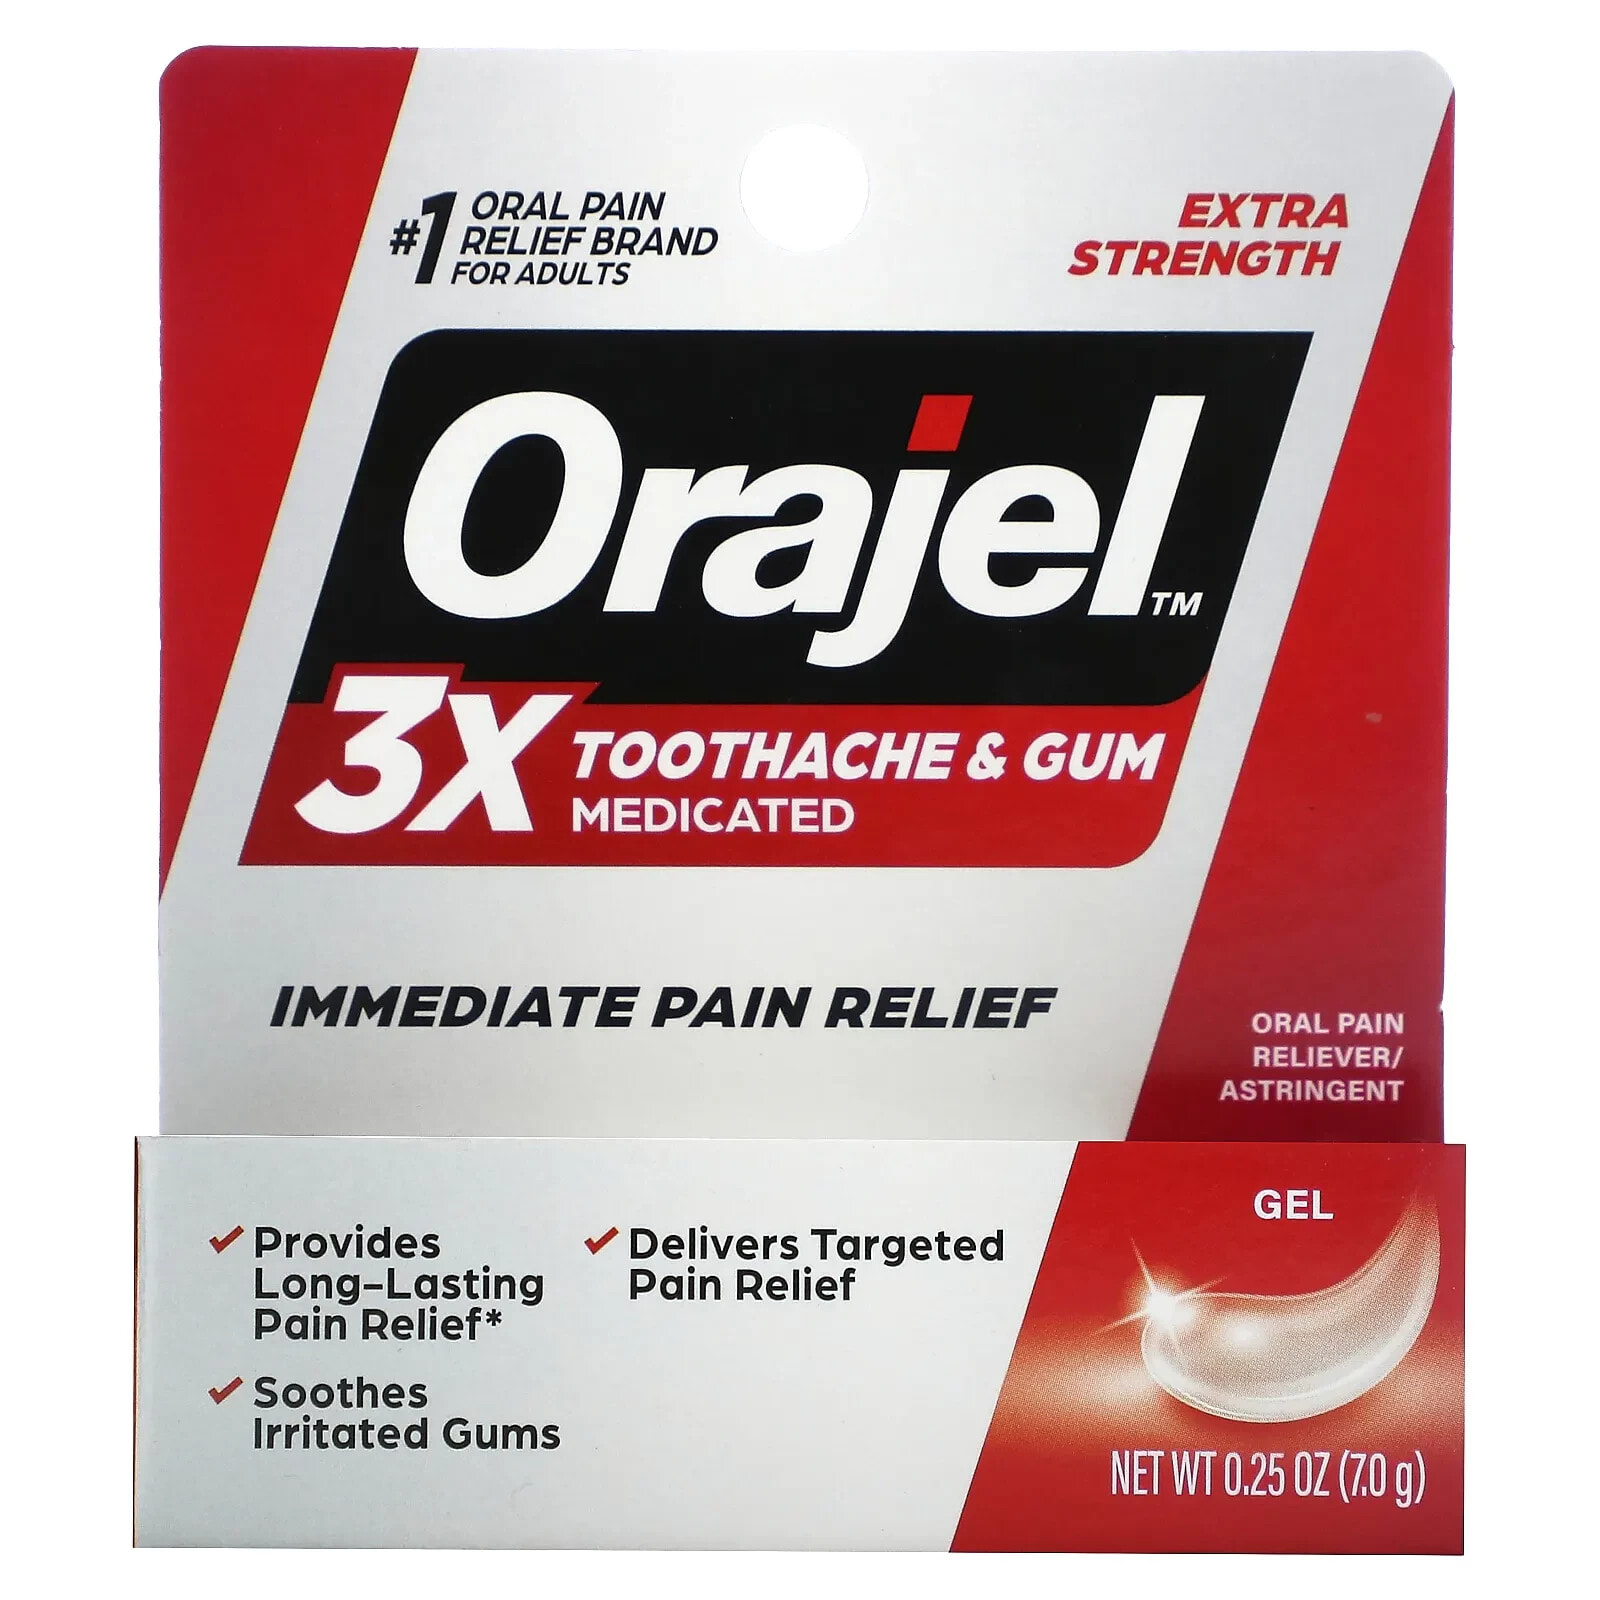 3X Medicated For Toothache & Gum Gel, Extra Strength, 0.25 oz (7 g)